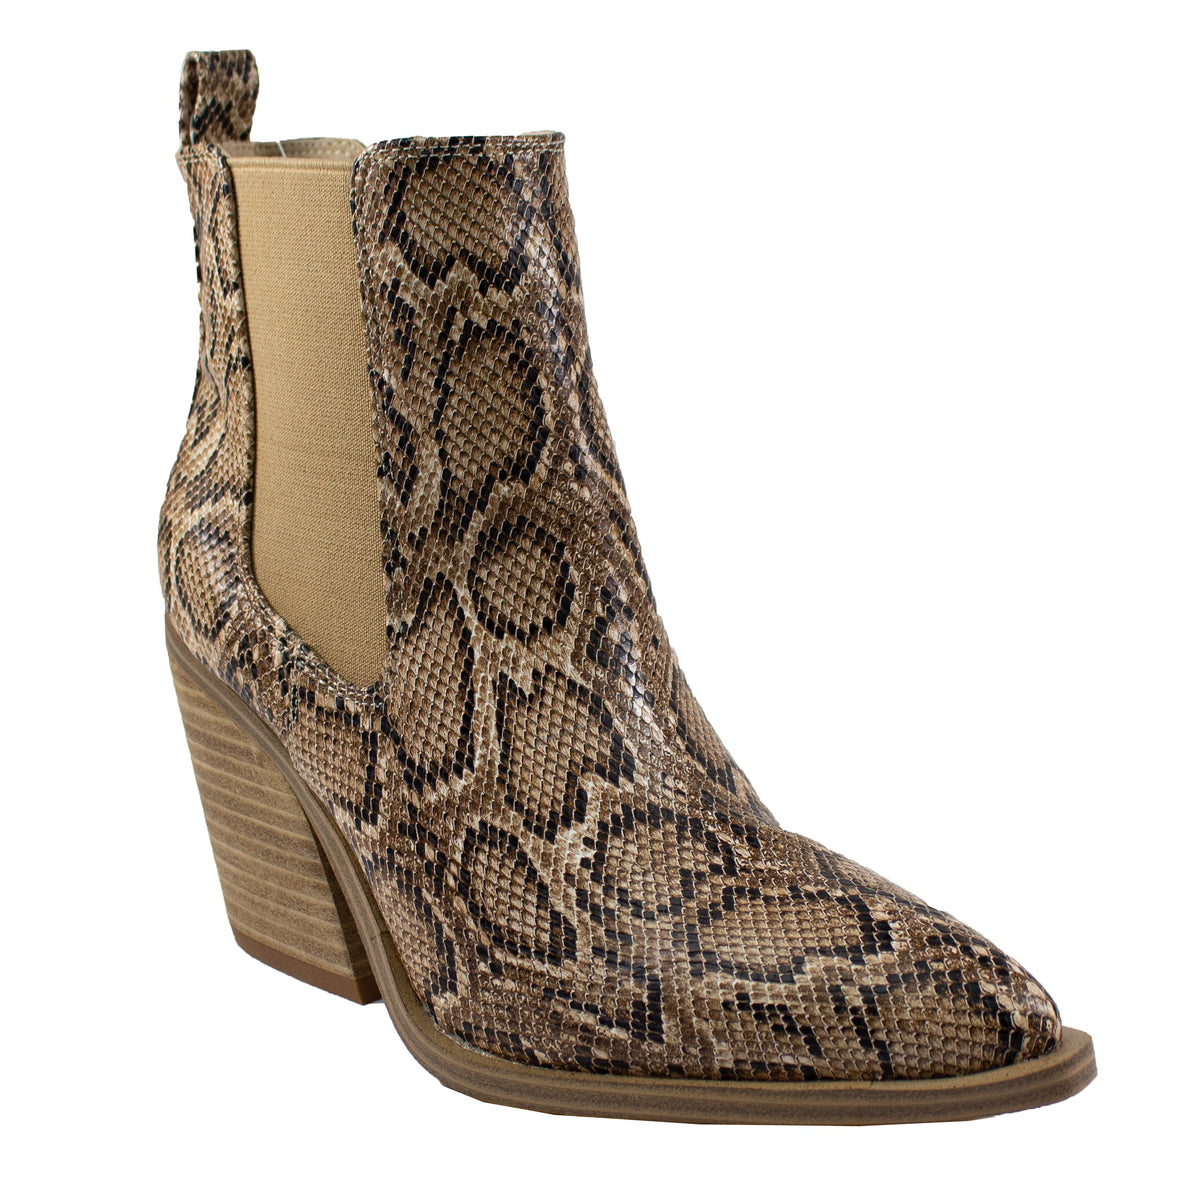 Western Booties Animal Prints Ankle Boot